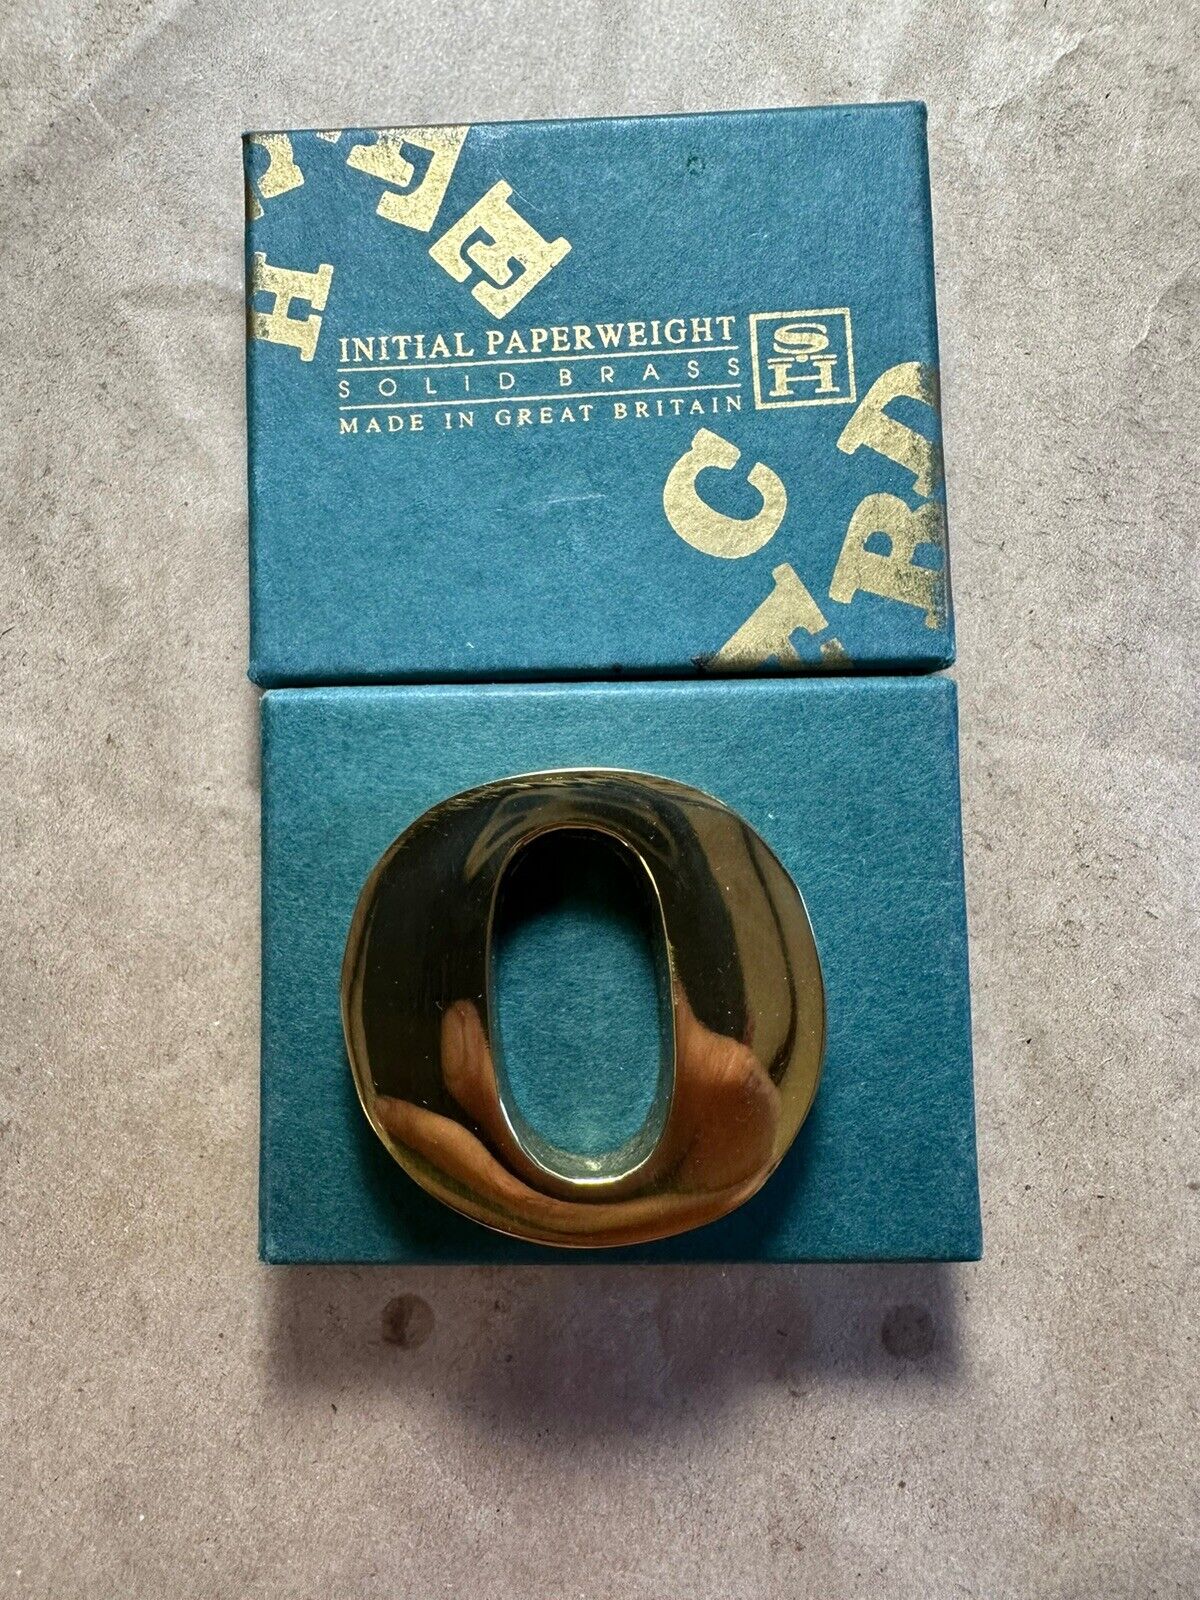 NEW w/Box Stuart Houghton Solid Brass Paperweight Initial Letter O